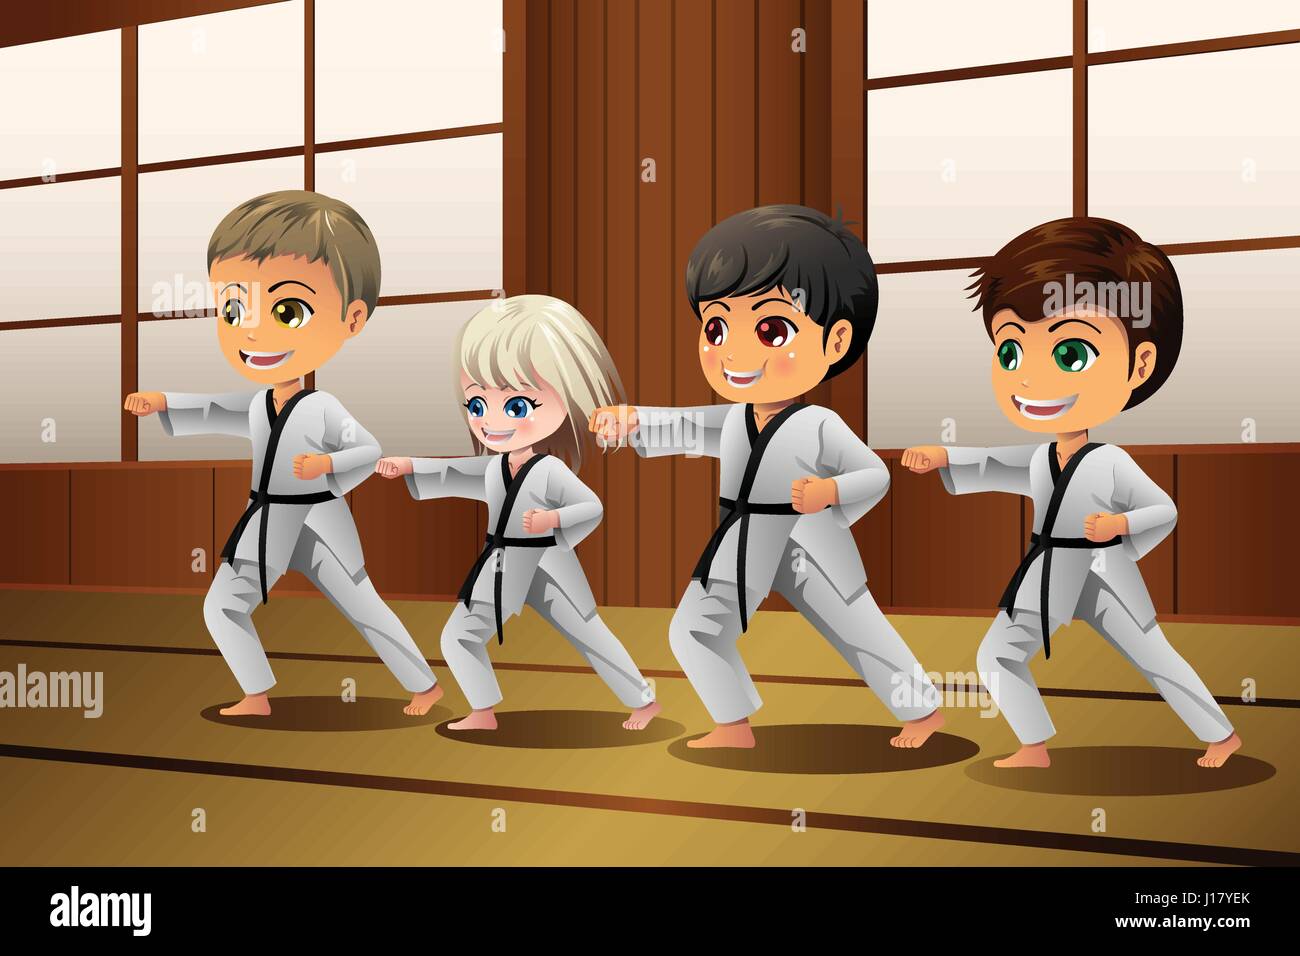 A vector illustration of Kids Practicing Martial Arts in the Dojo Stock Vector